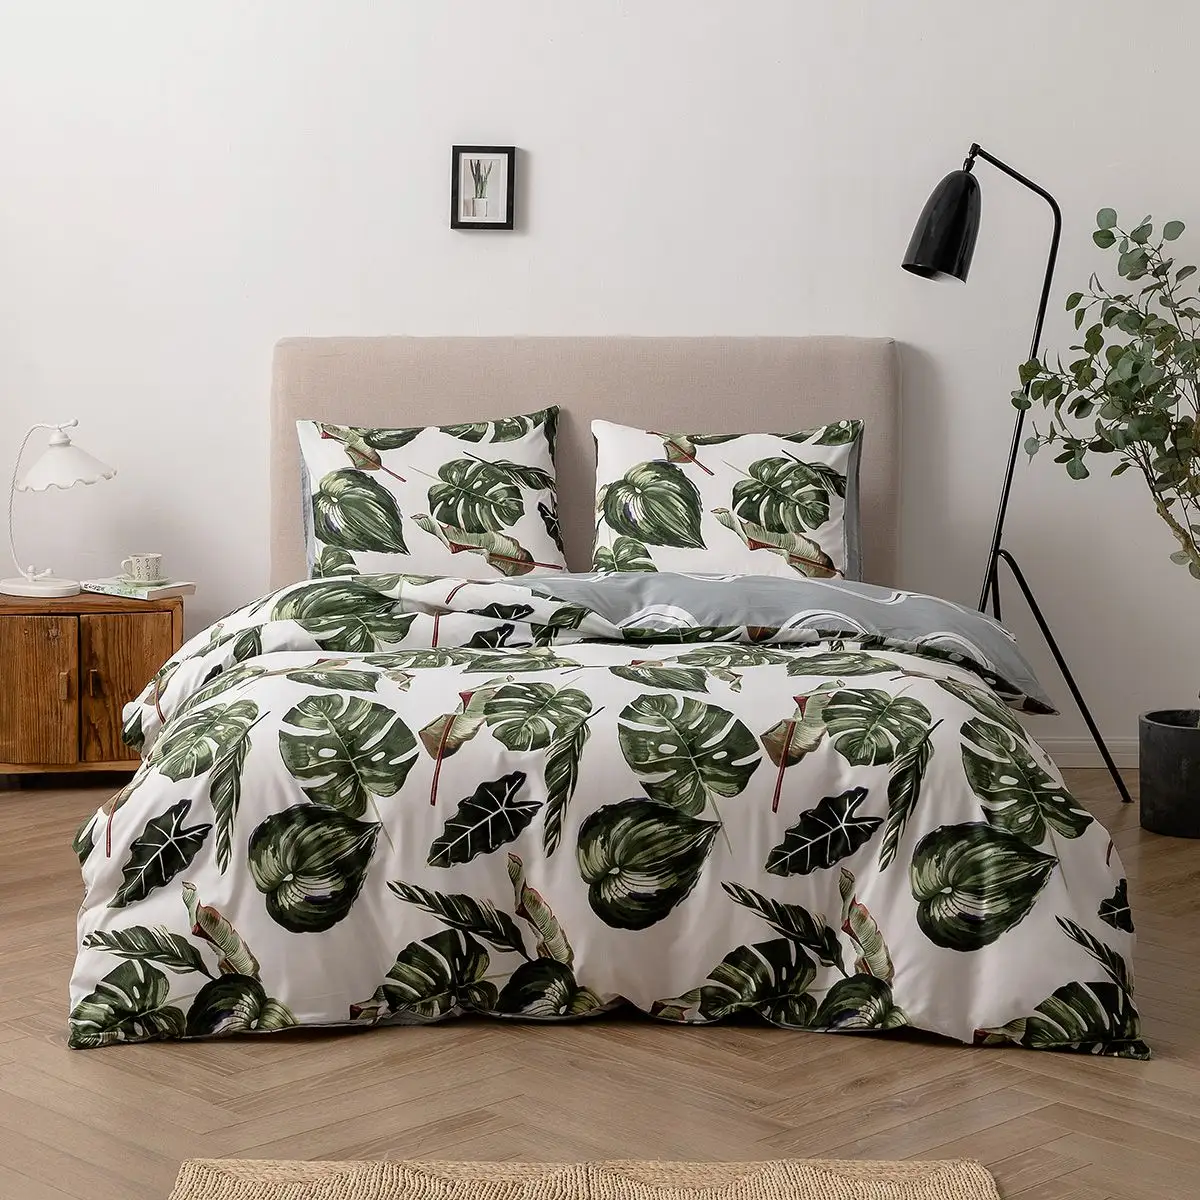 Wholesale Bed Sheets manufacturers HomeTextile Flat Sheet Flower Printed Bed Cover Soft Bedsheet